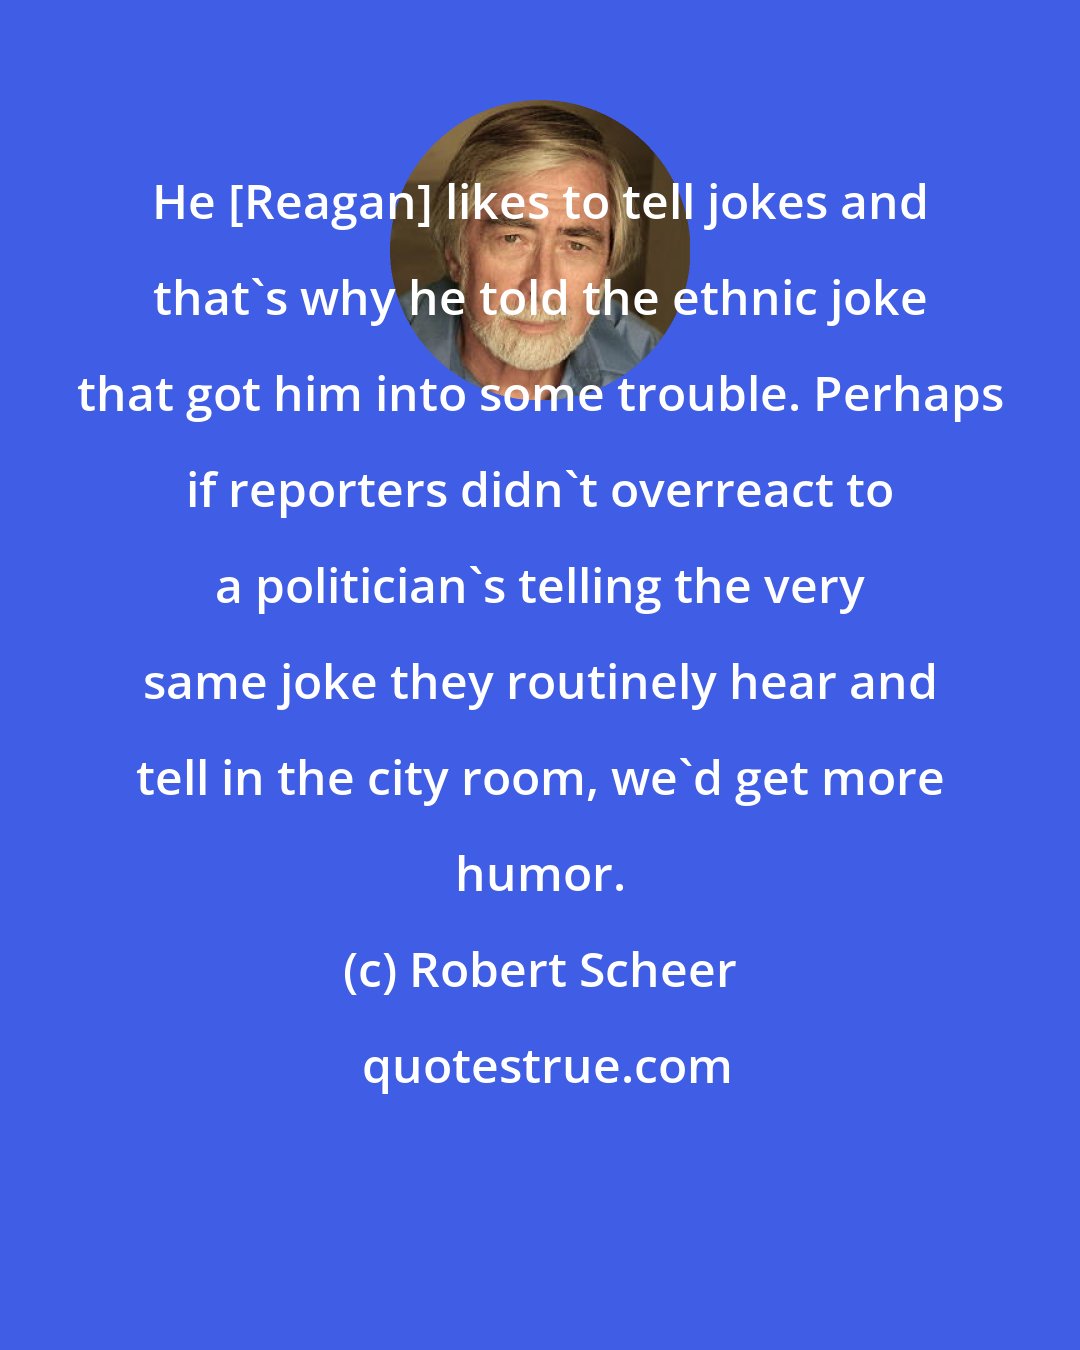 Robert Scheer: He [Reagan] likes to tell jokes and that's why he told the ethnic joke that got him into some trouble. Perhaps if reporters didn't overreact to a politician's telling the very same joke they routinely hear and tell in the city room, we'd get more humor.